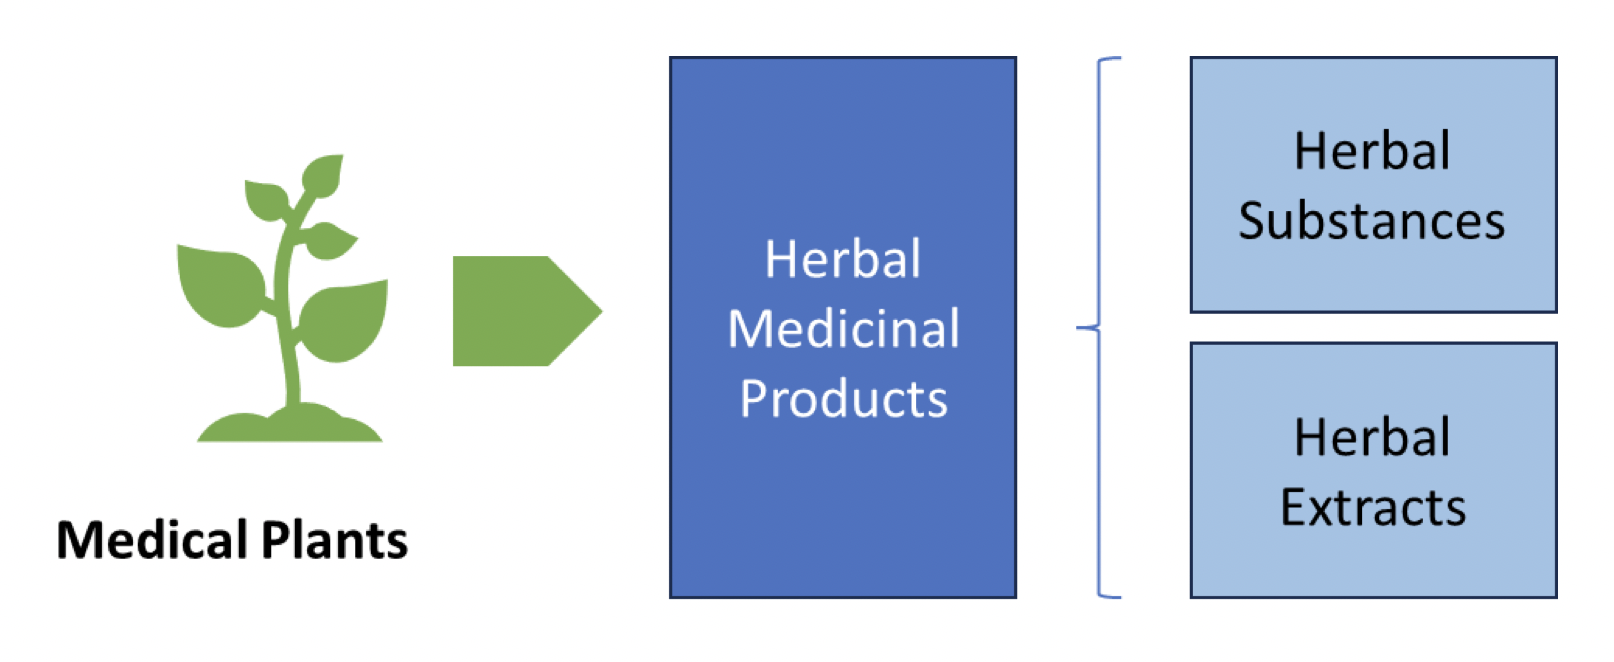 Herbal Medicinal Products > Herbal Substances - Herbal Extracts